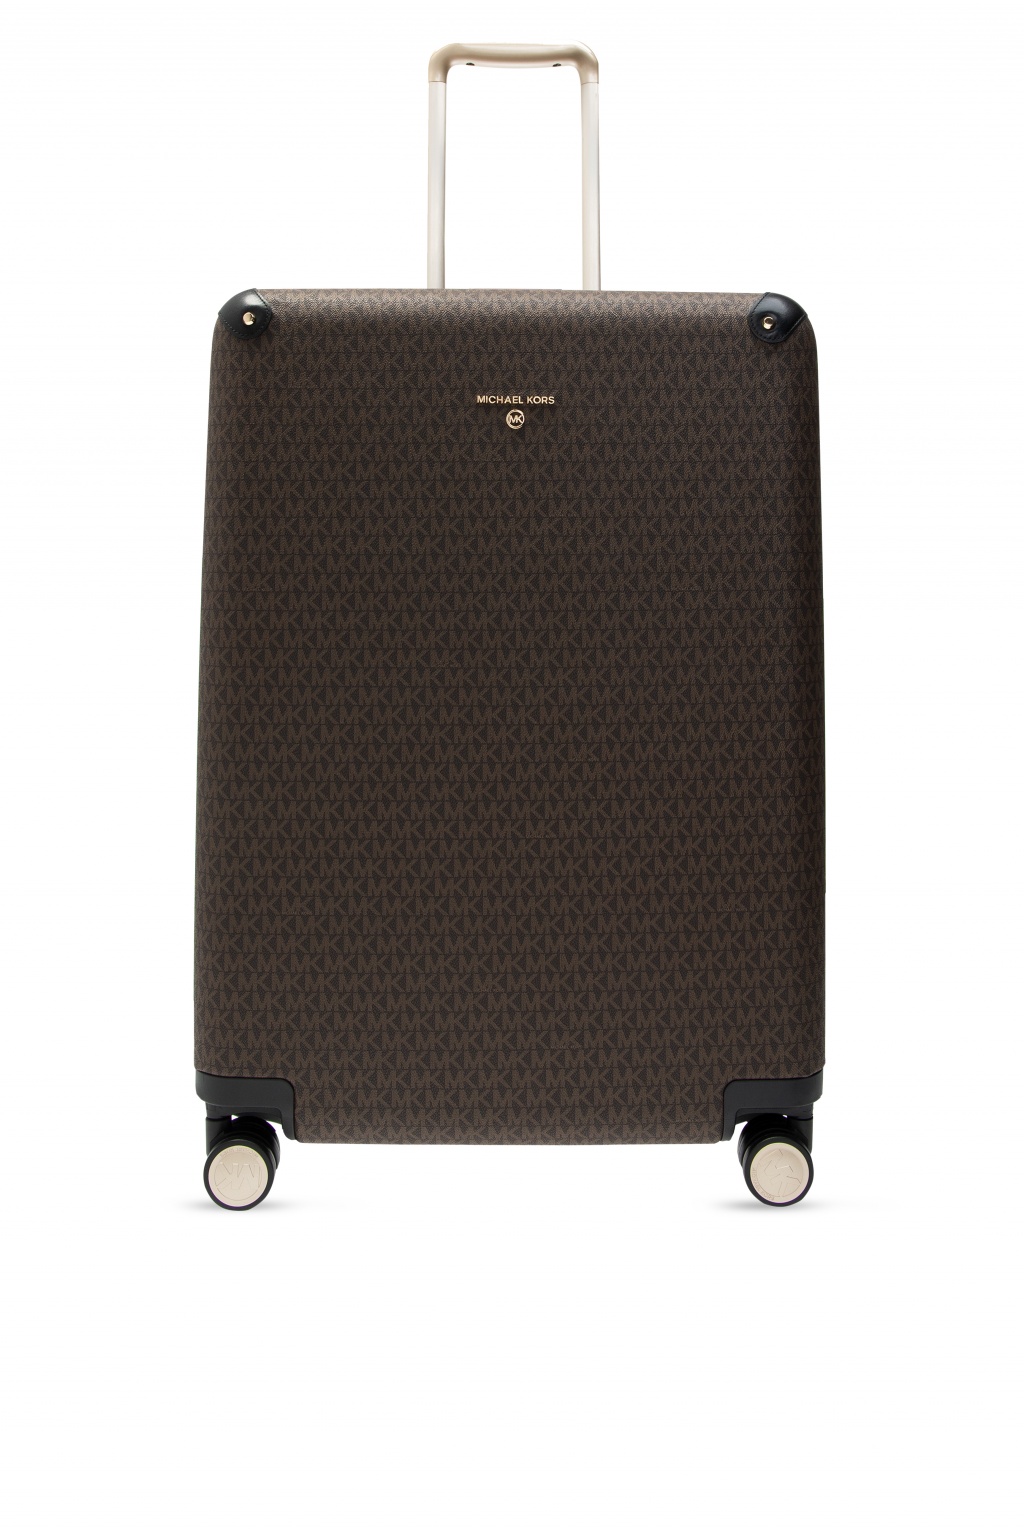 michael kors carry on luggage with wheels